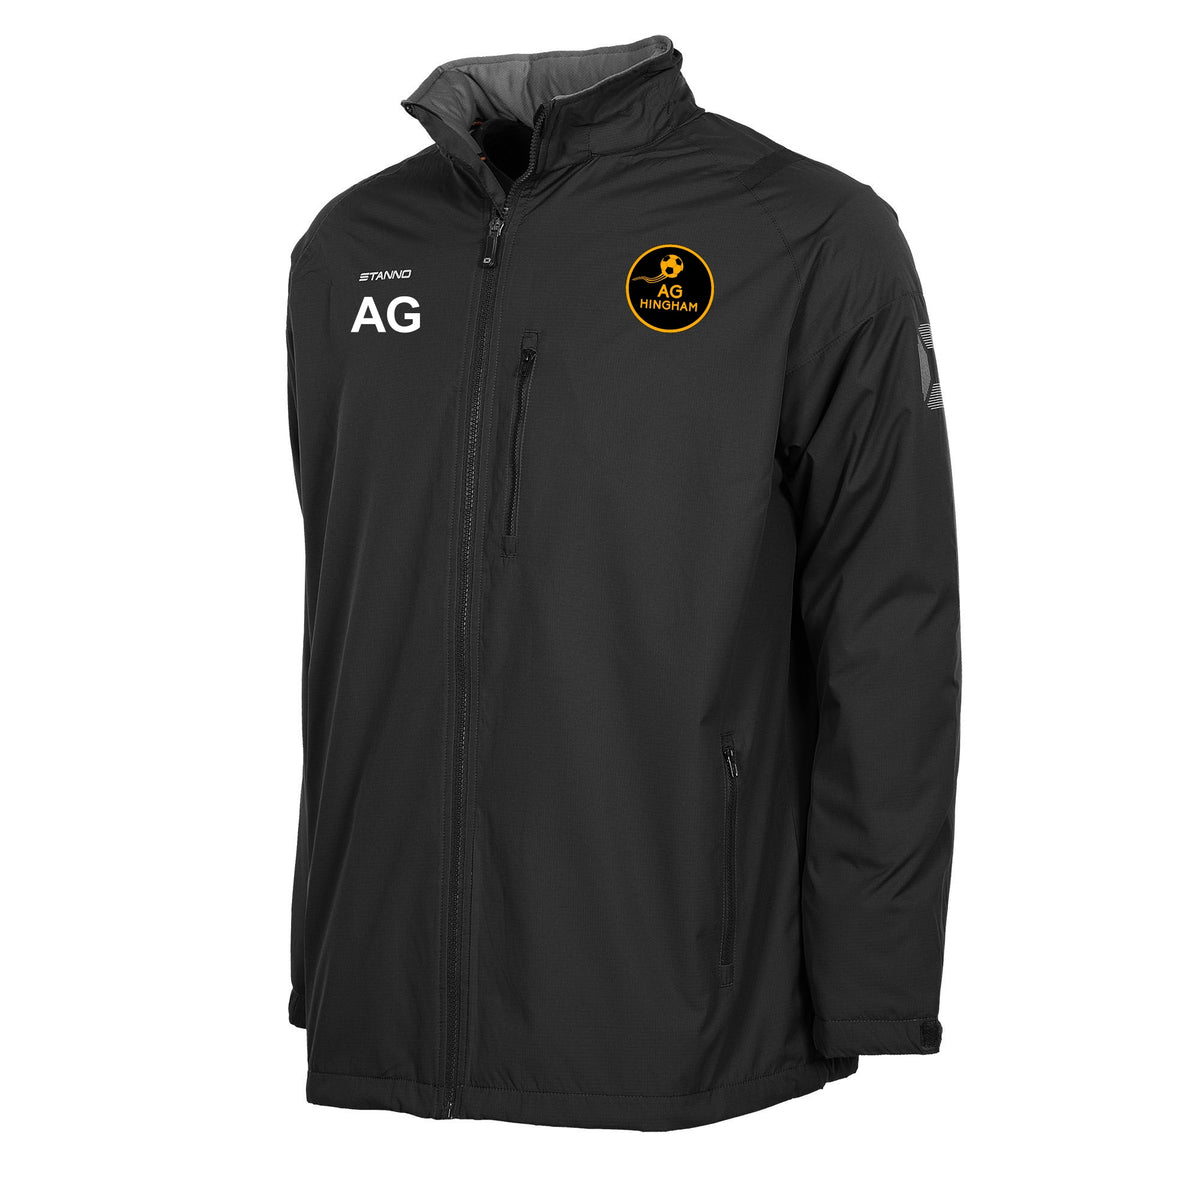 AG Hingham Stanno Centro All Season Jacket in Adult